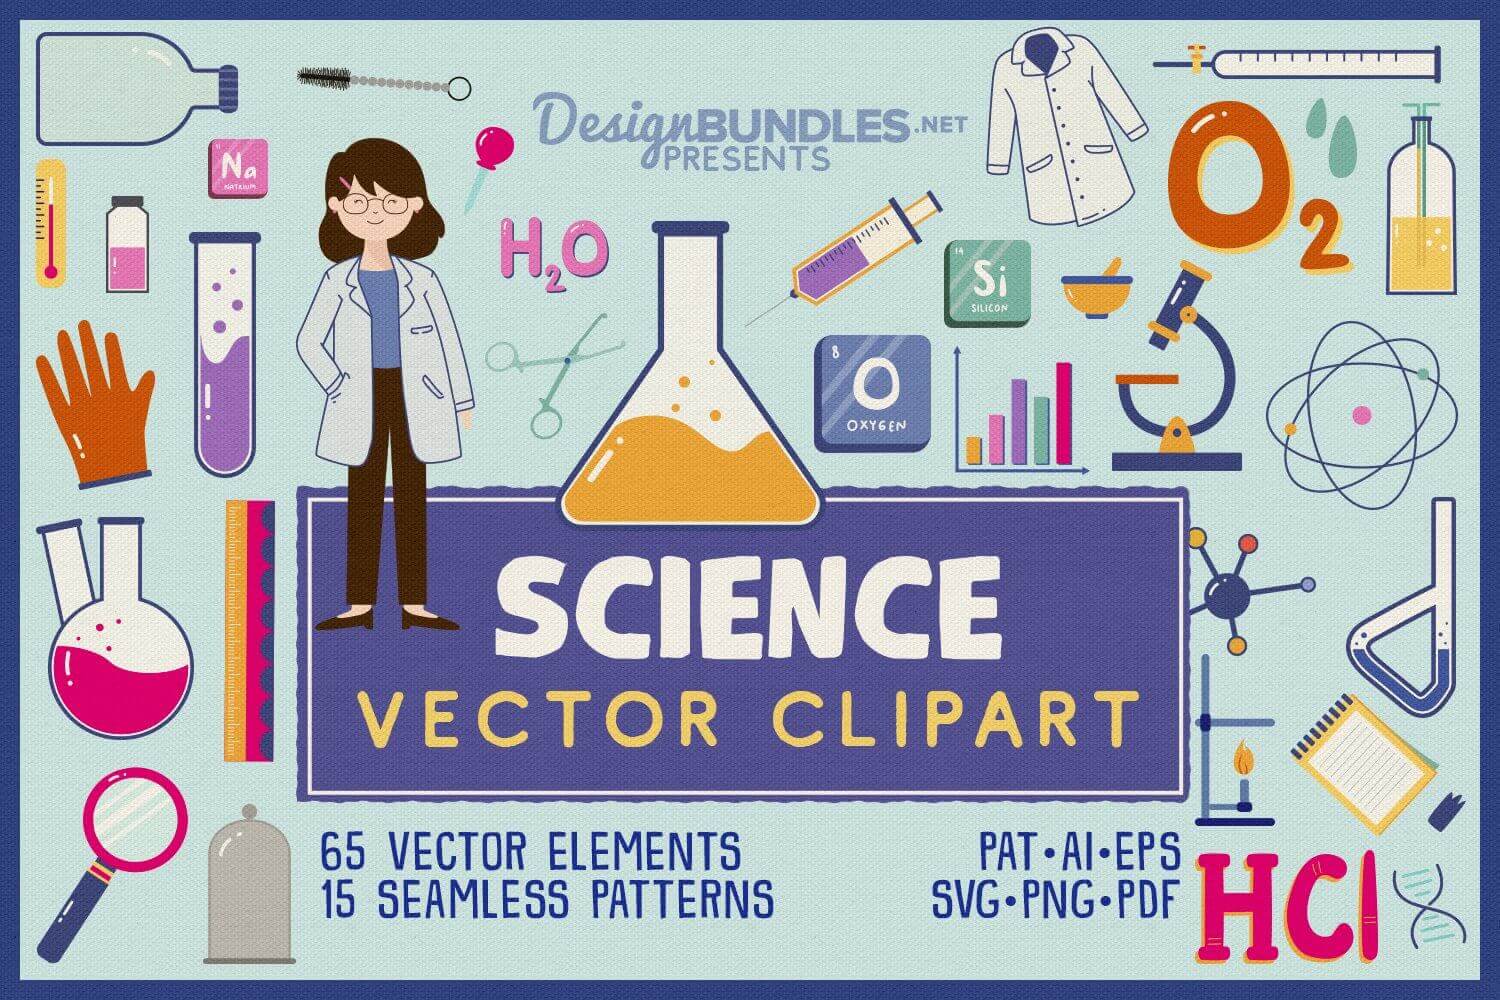 15 seamless patterns of Science vector clipart.